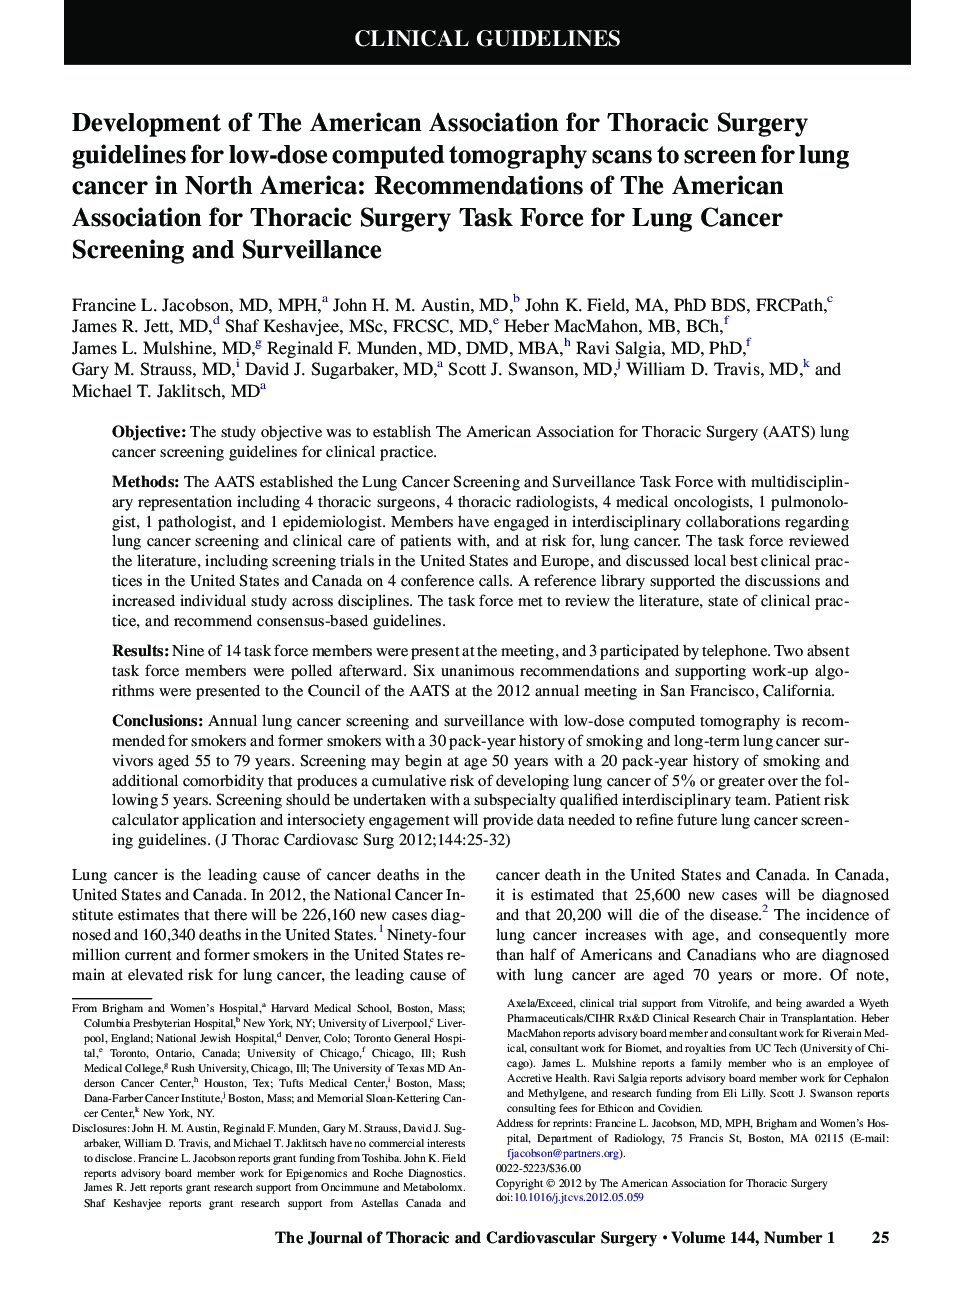 Development of The American Association for Thoracic Surgery guidelines for low-dose computed tomography scans to screen for lung cancer in North America: Recommendations of The American Association for Thoracic Surgery Task Force for Lung Cancer Screenin